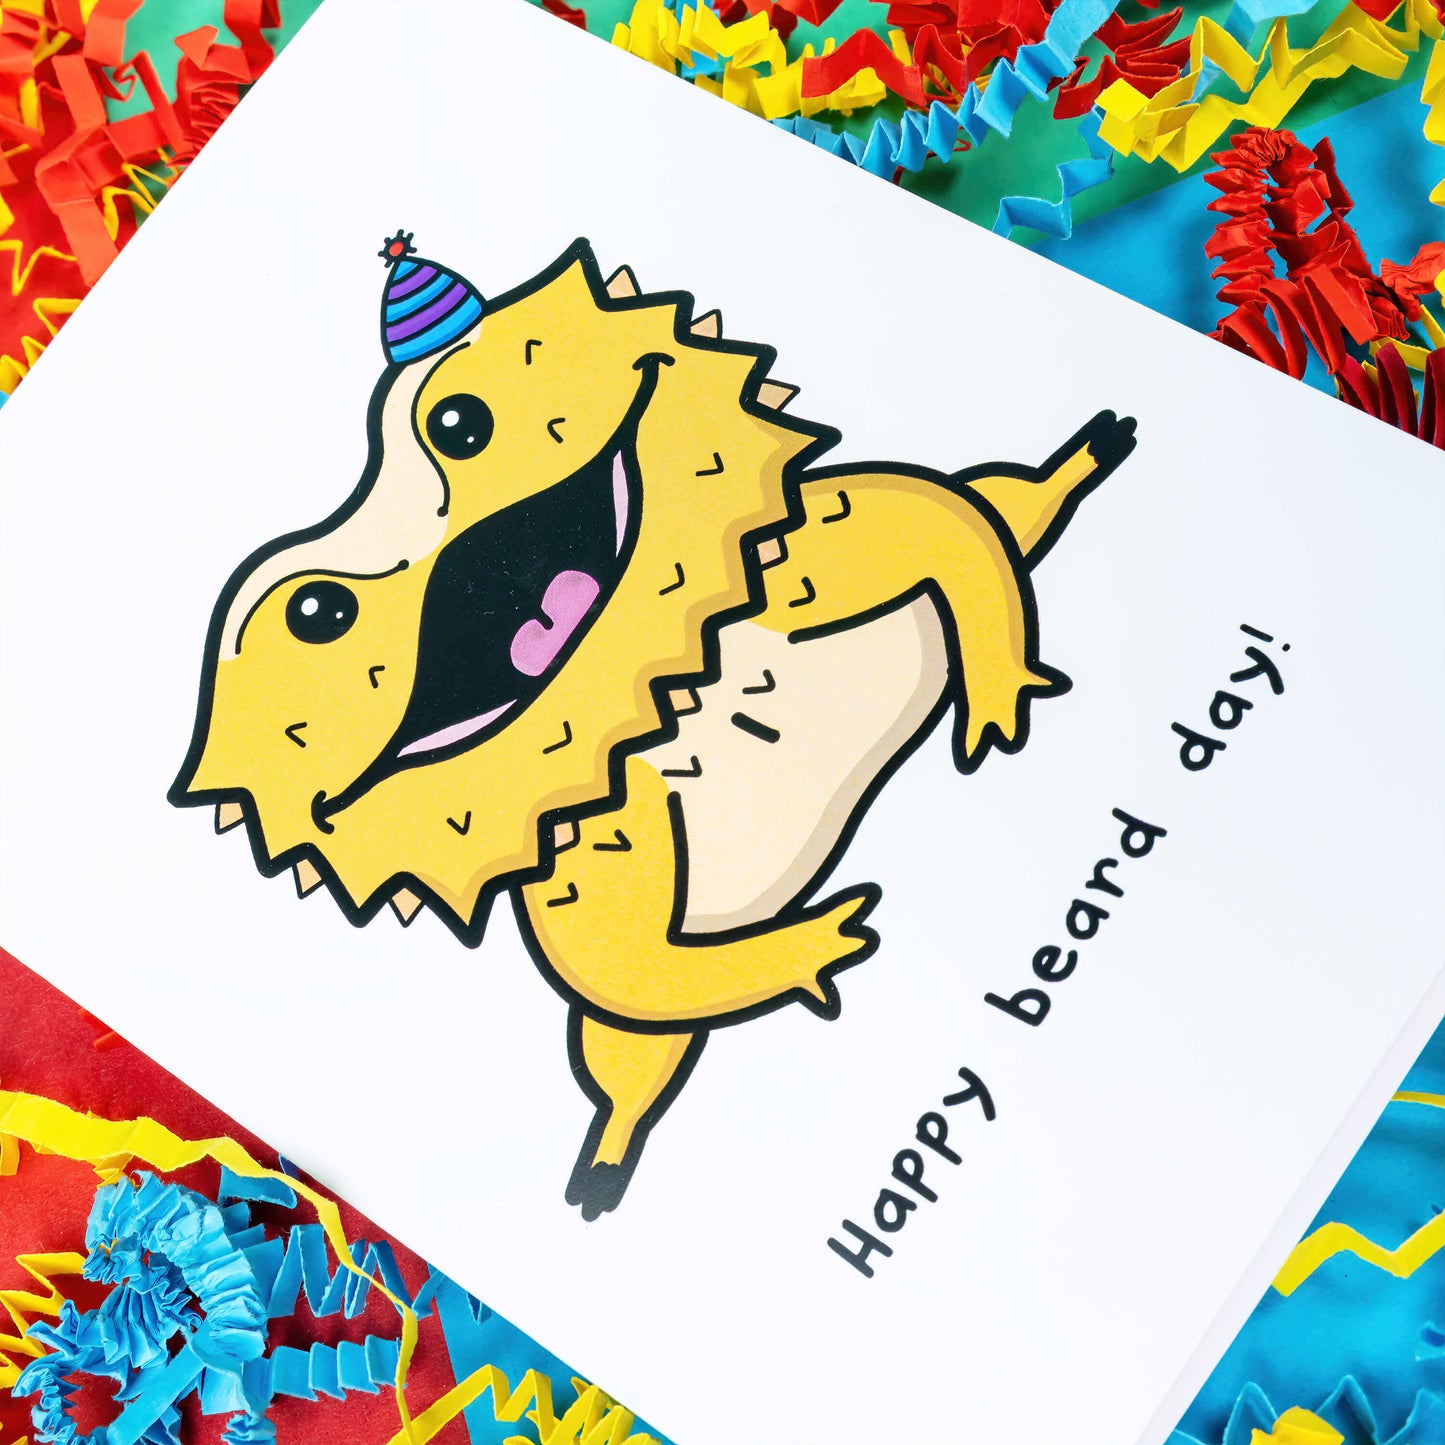 Close up of the Happy Beard Day - Bearded Dragon A6 Birthday Card on a green, blue and red background with yellow, blue and red crinkled card confetti. The white card features a happy bearded dragon reptile wearing a purple stripe party hat, underneath in black reads Happy Beard Day!